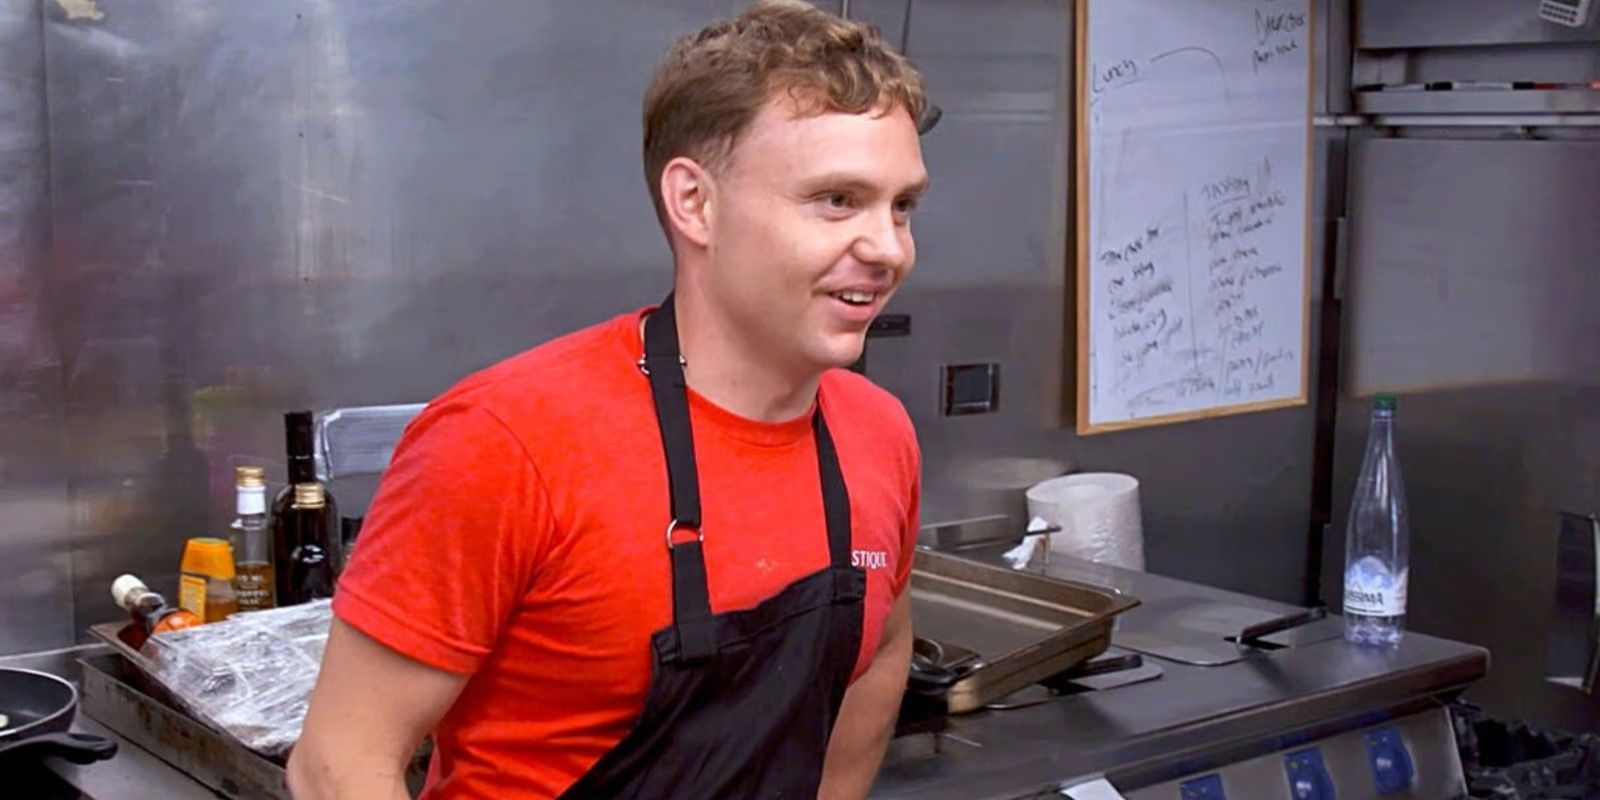 Chef Jack Luby from Below Deck Med season 8 in the galley wearing an apron and a red shirt